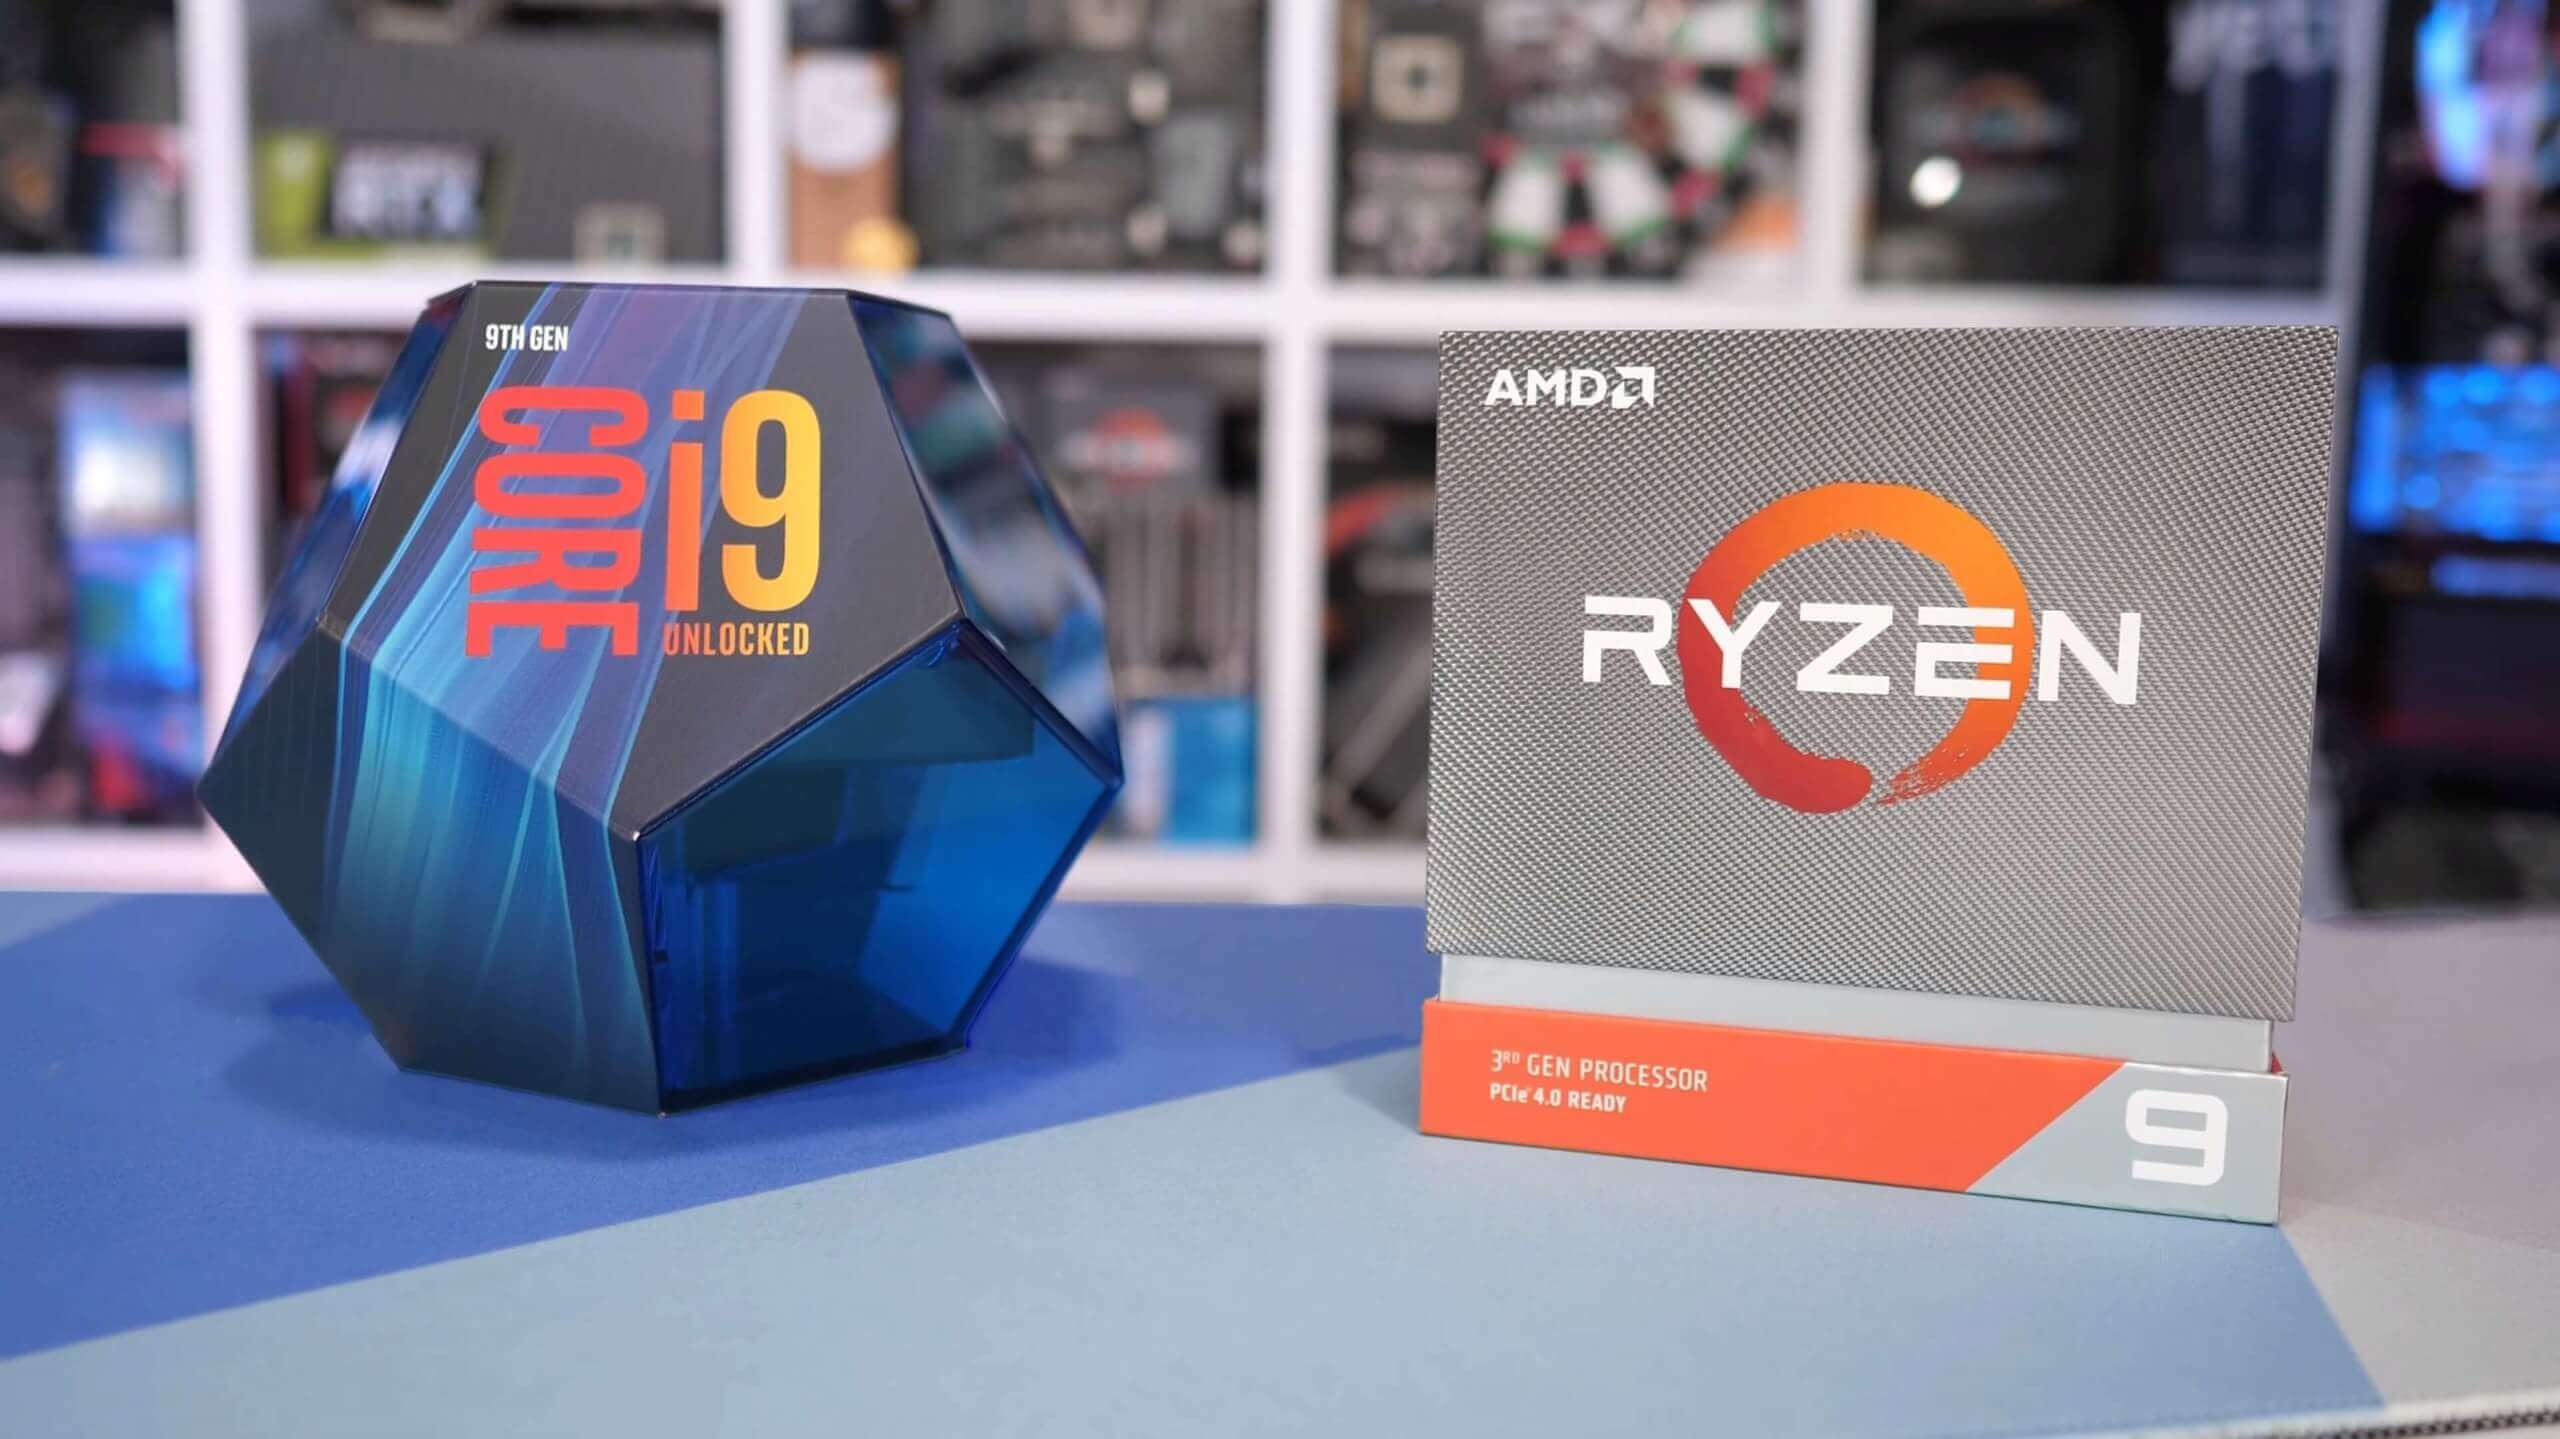 Intel praises AMD for 'closing the gap' but says i9-9900K is still better for gaming